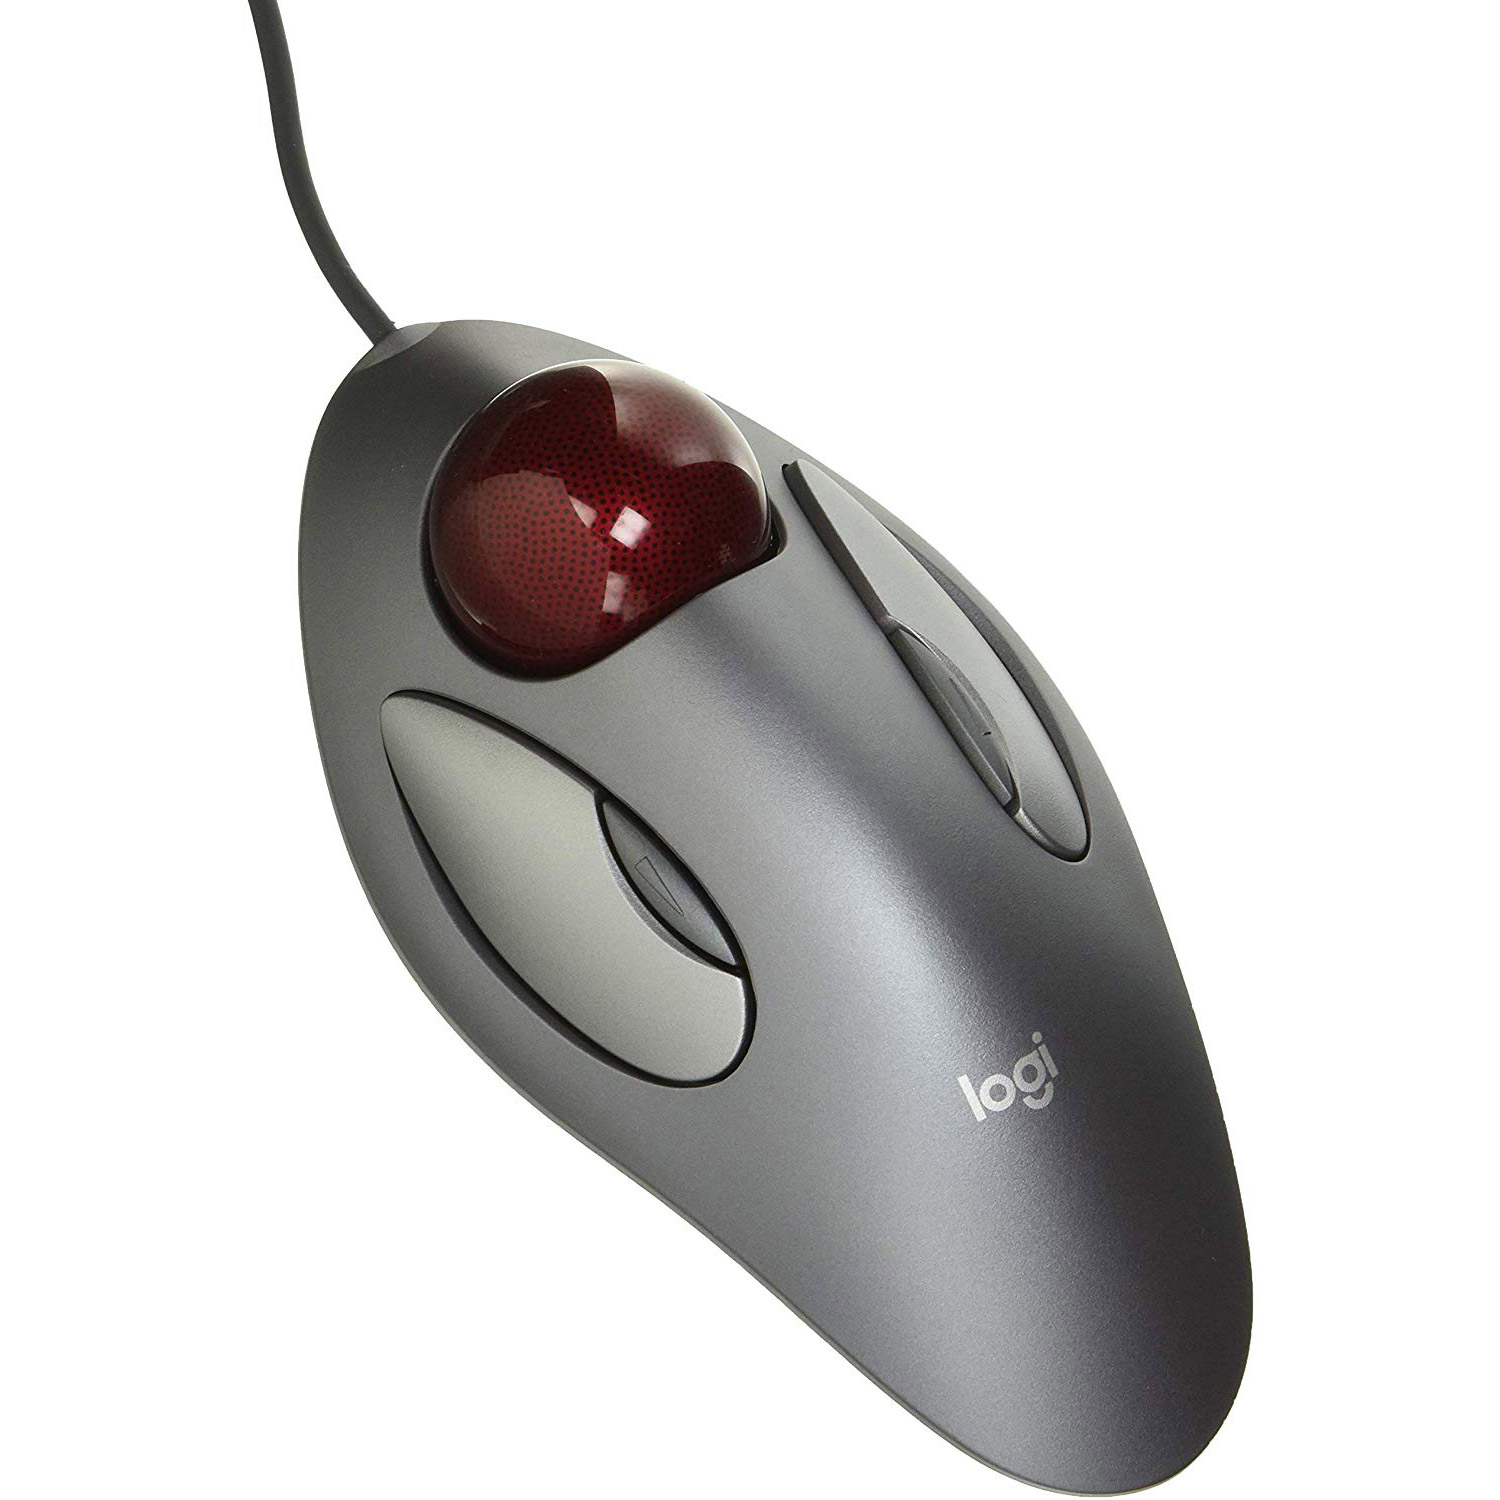 Logitech TrackMan Marble - Trackball Mouse Reviews